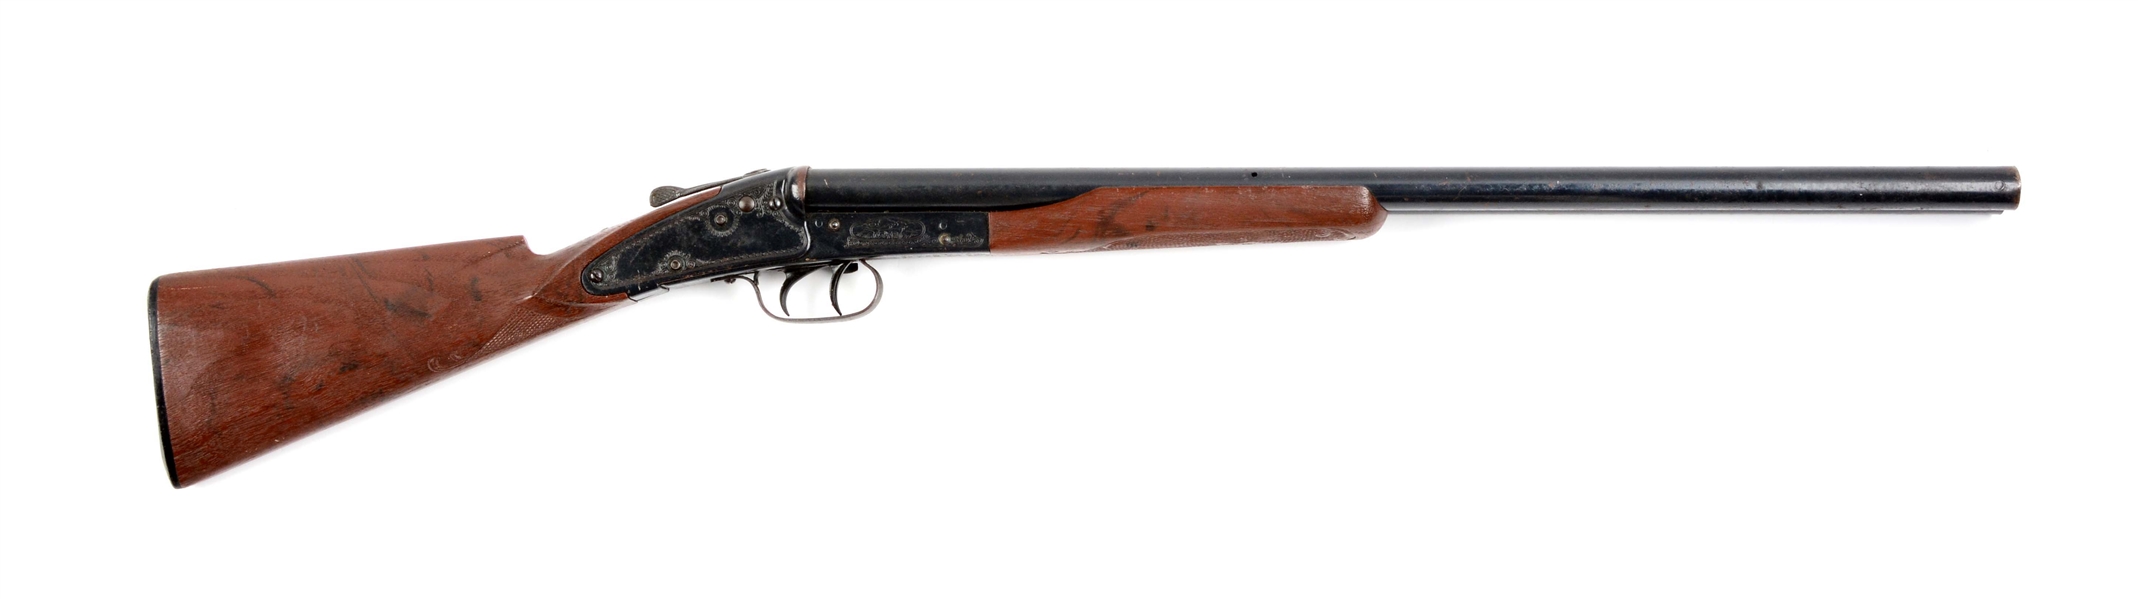 DAISY MODEL 410 SIDE BY SIDE AIR RIFLE.